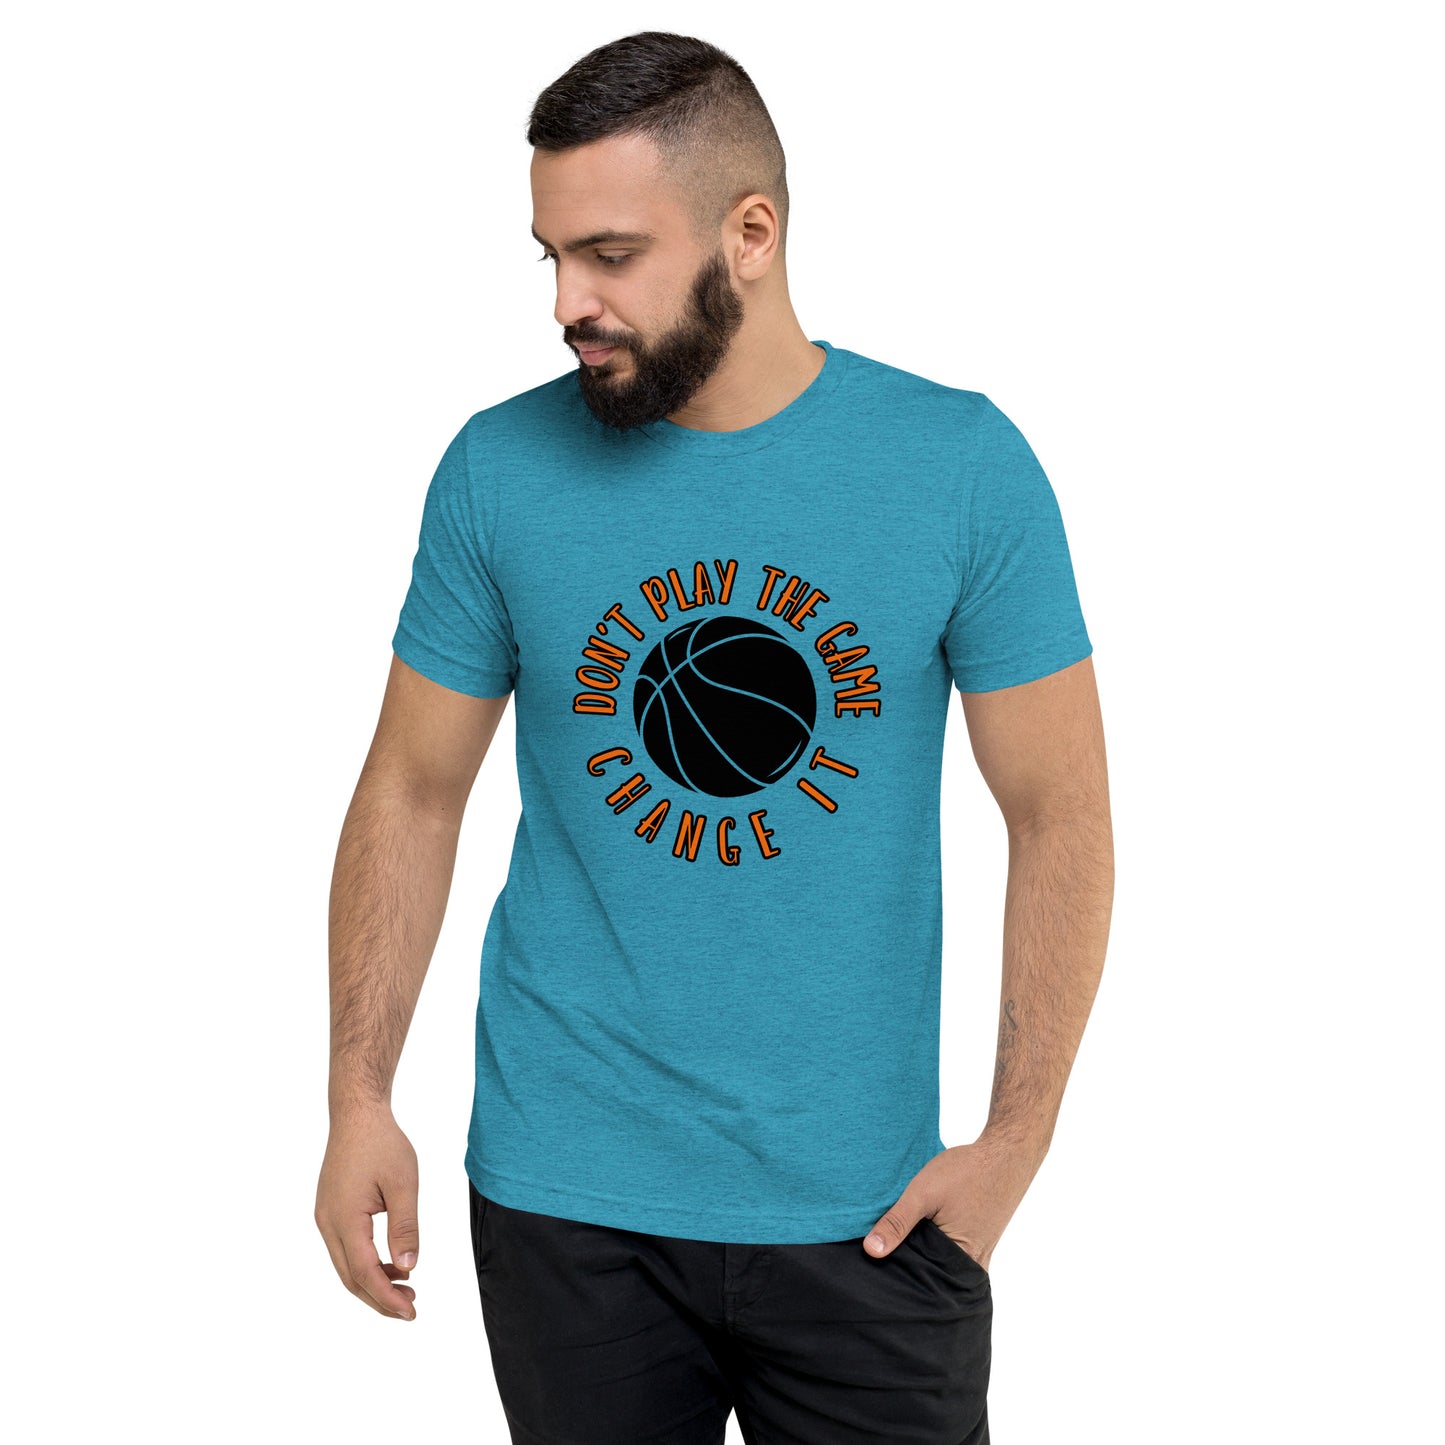 "Change the Game" Short sleeve T-shirt